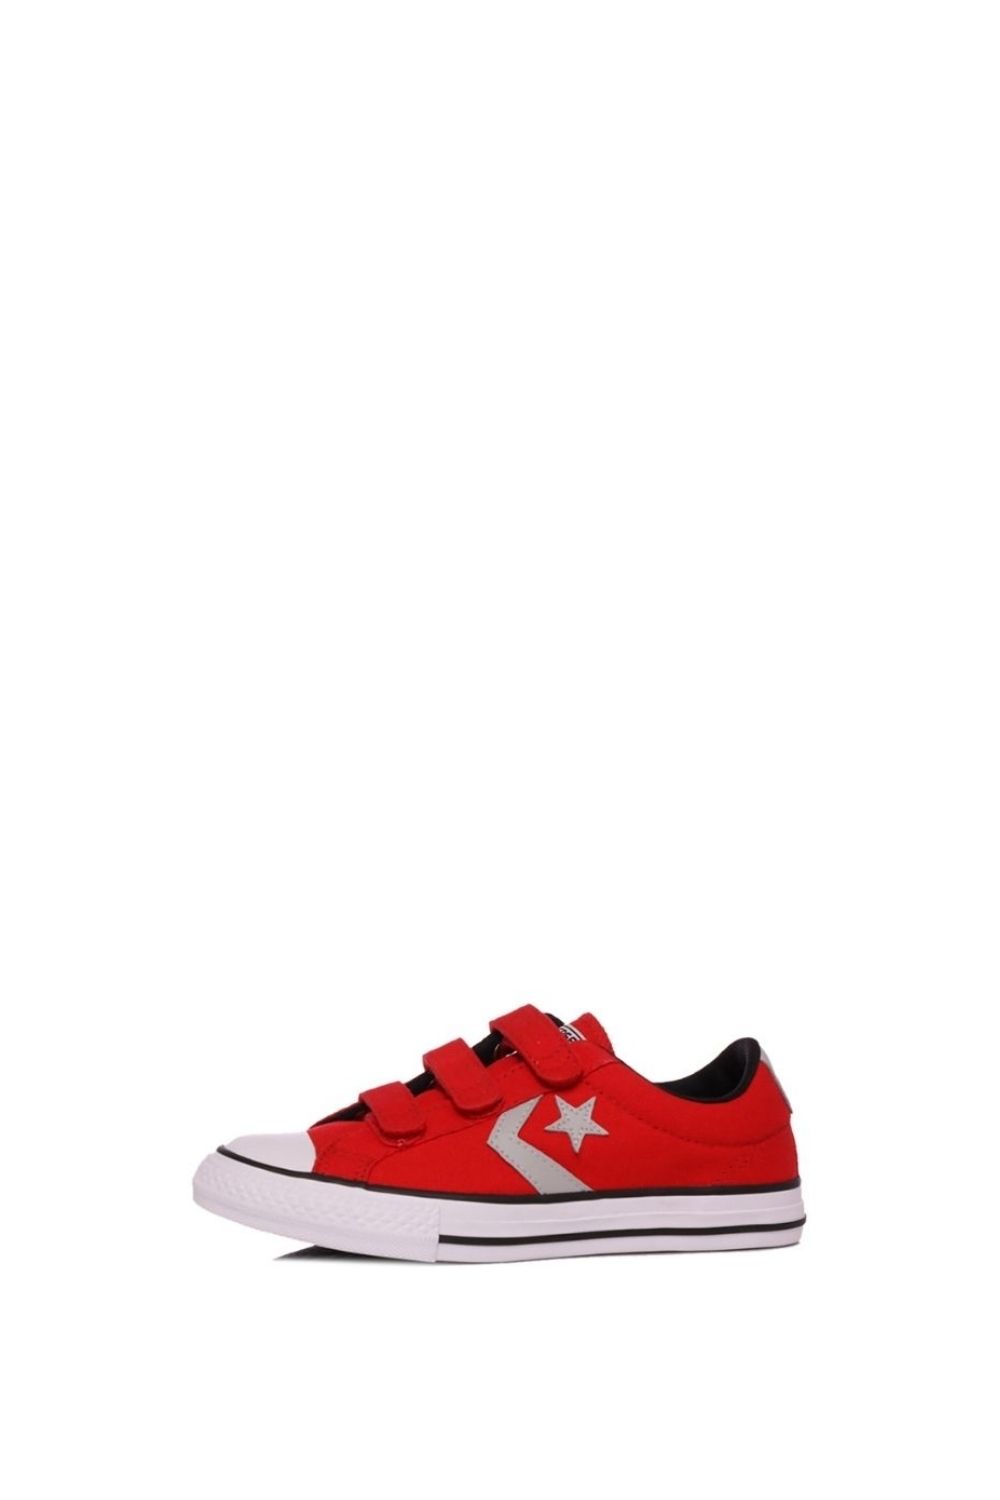 CONVERSE - Παιδικά sneakers CONVERSE Star Player EV 3V Ox κόκκινα γκρι Παιδικά/Boys/Παπούτσια/Sneakers